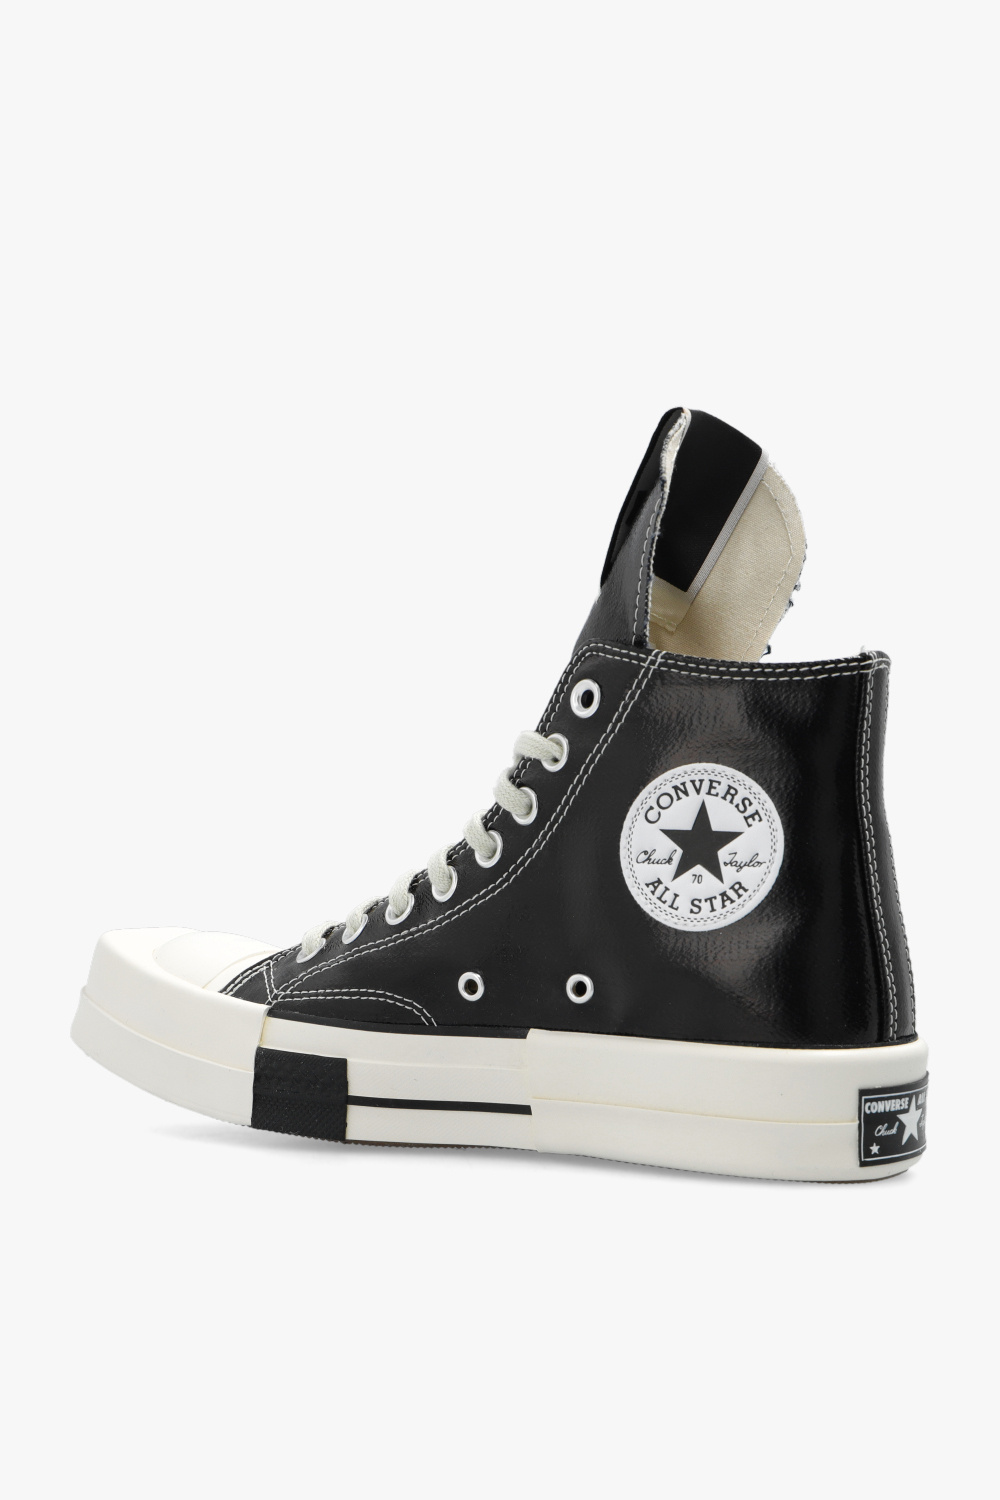 converse Low converse Low converse Low branding to front